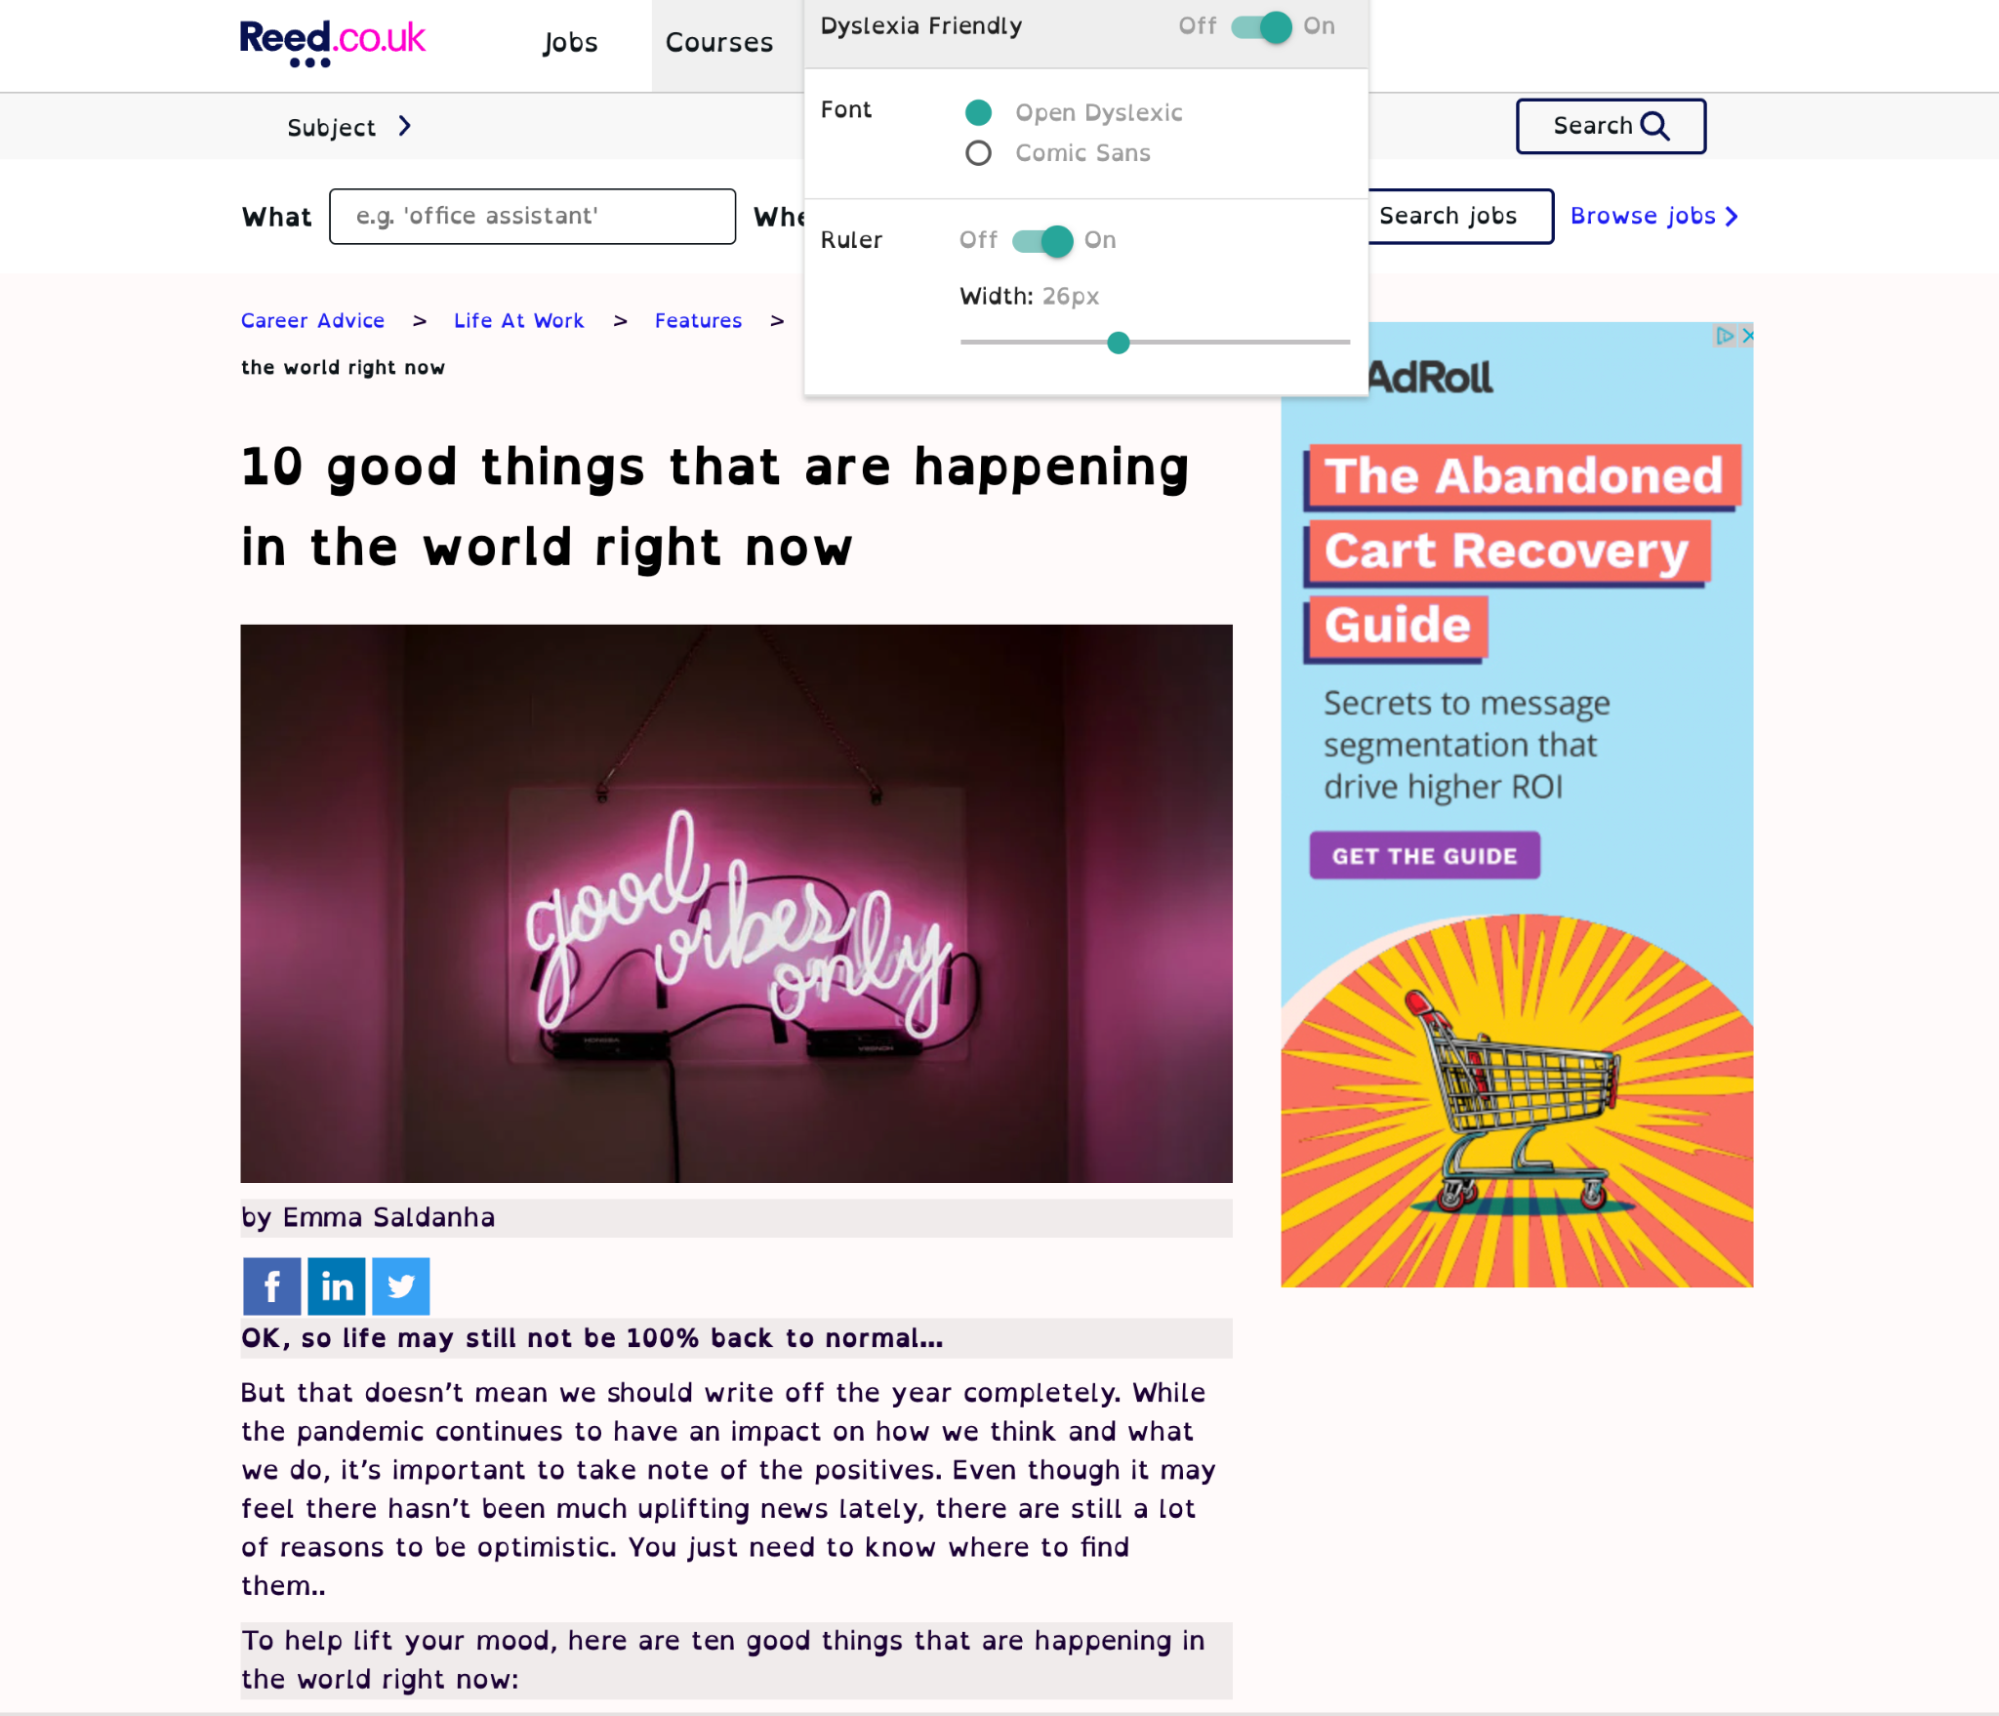 Web page titled ’10 good things happening in the world,’ with dyslexia-friendly text.